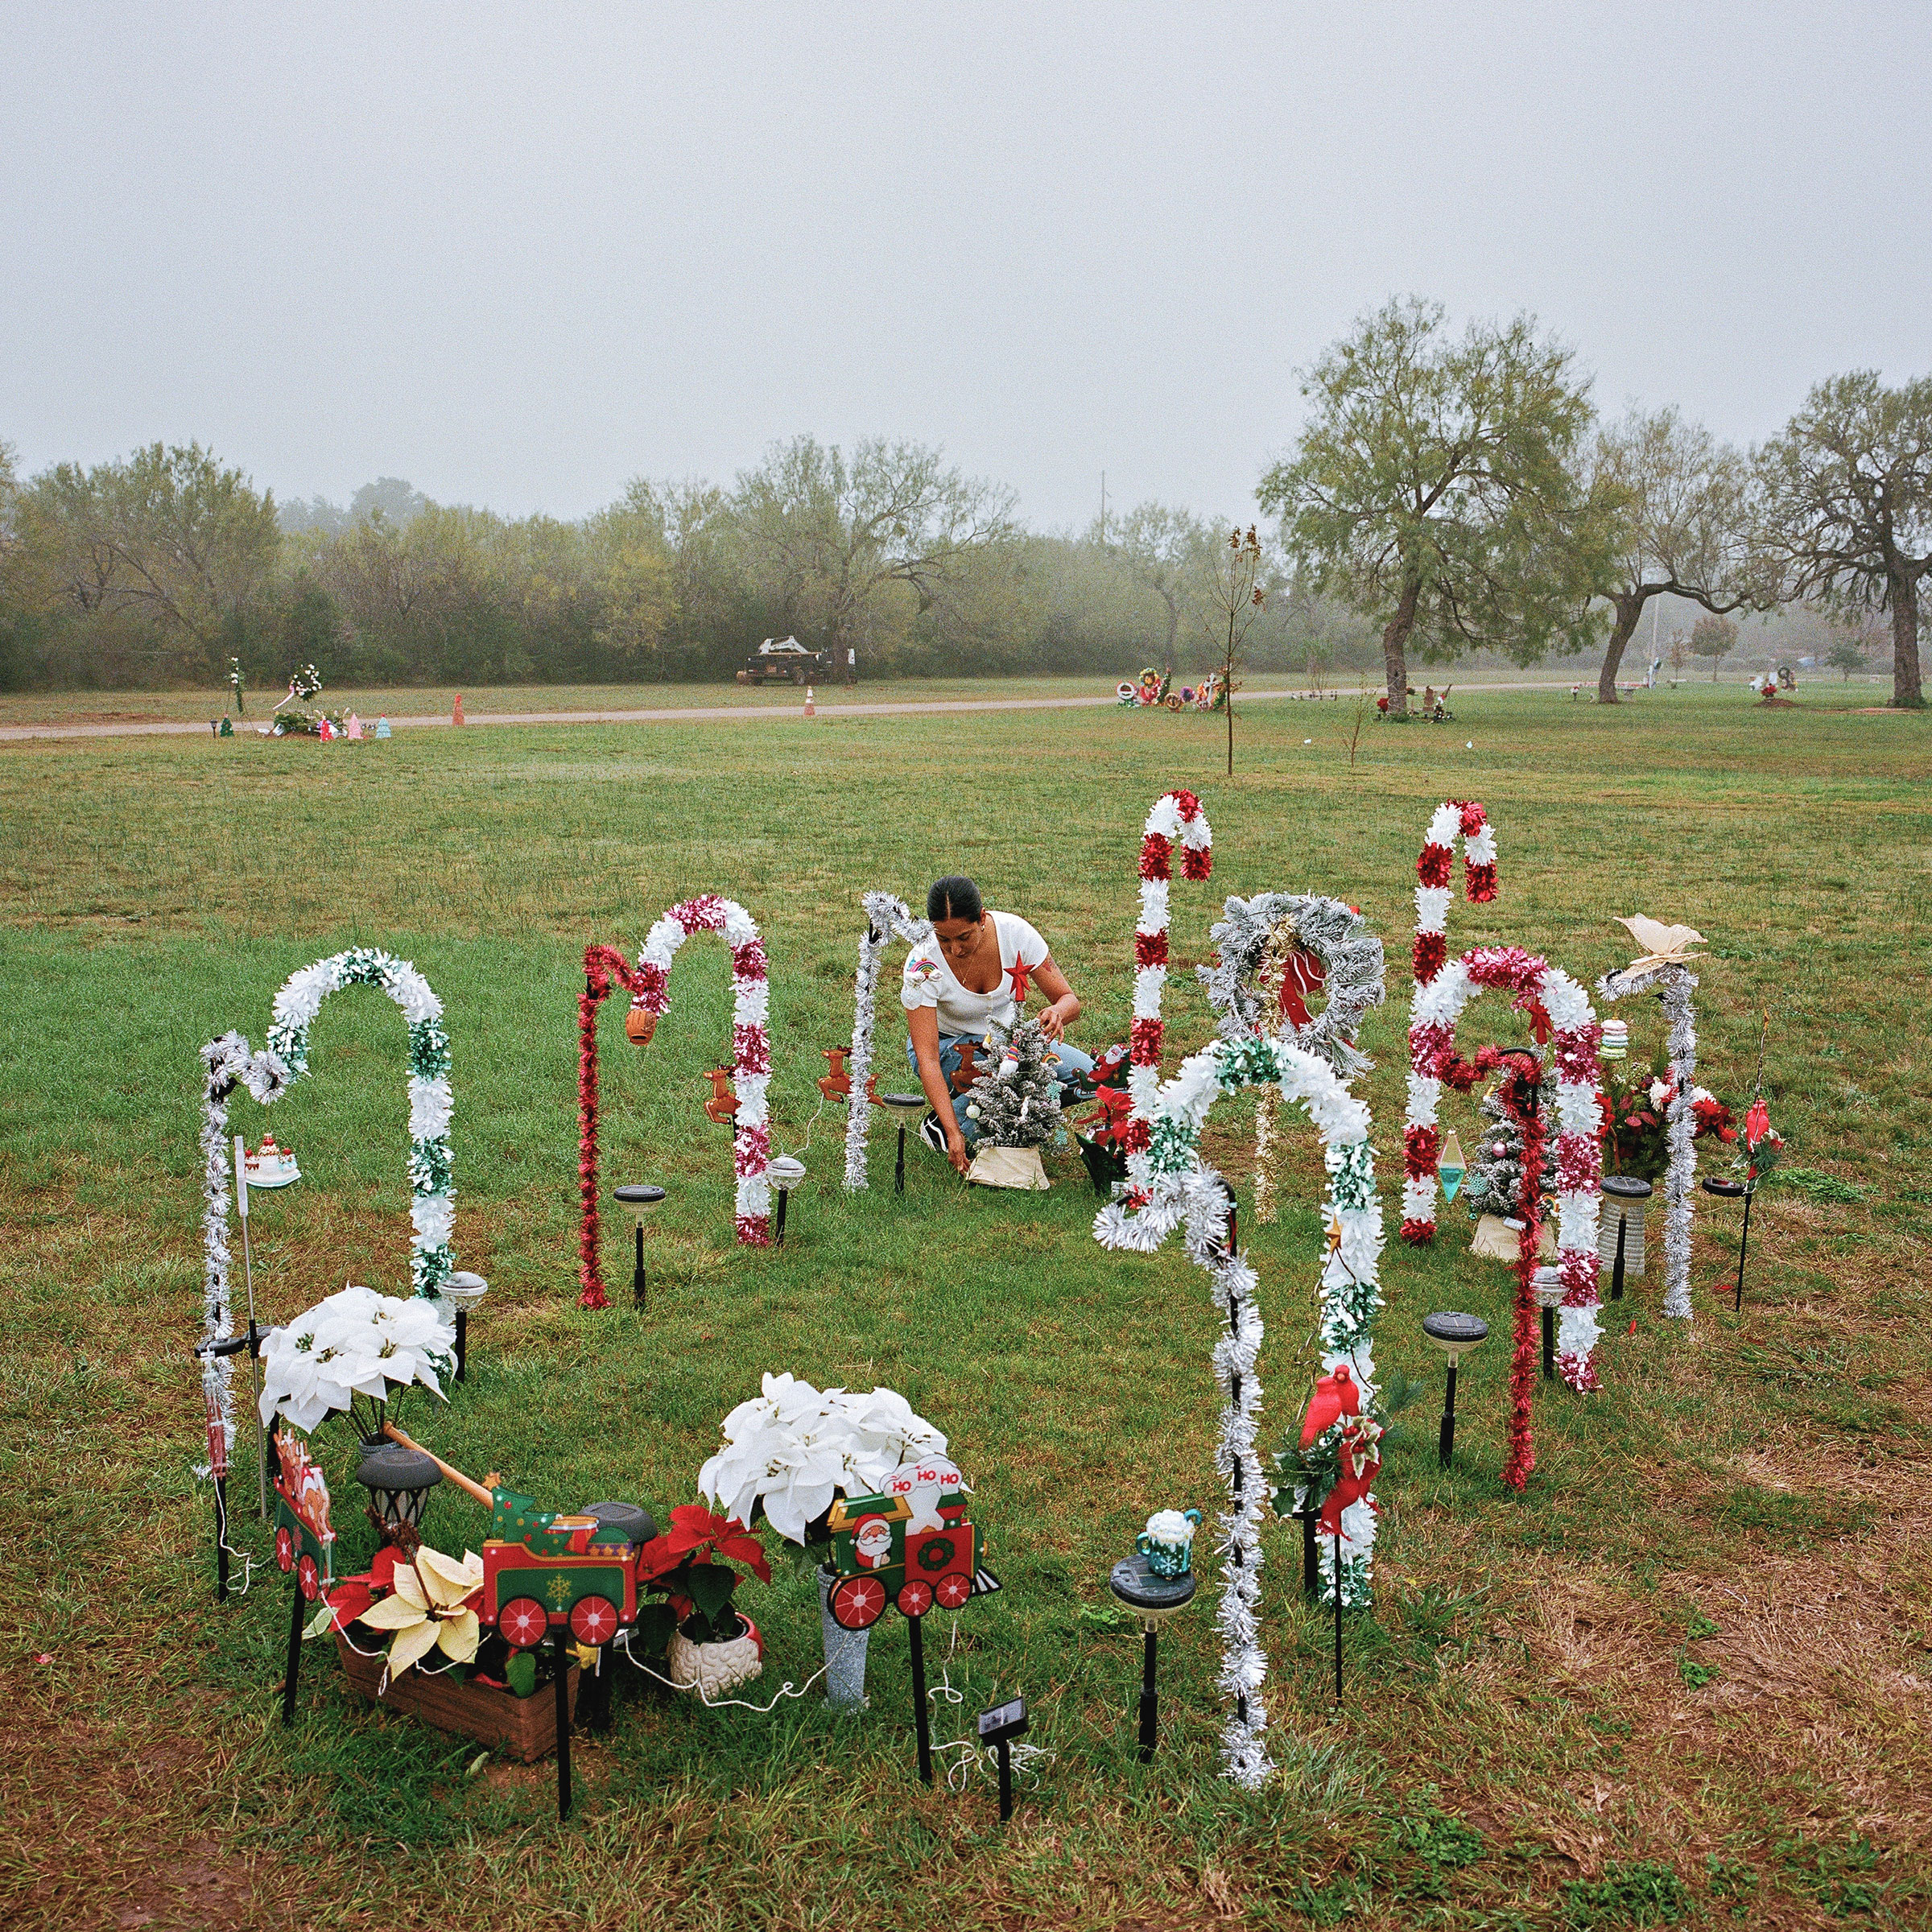 Uvalde, Texas - December 12, 2022:Kimberly , the mother of Lexi Rubio who was killed at the Robb Elementary School shooting earlier this year, visited plot at the cemetery where Lexi’s body was buried Uvlade, Texas on December 12, 2022. The parents, who decorate the plot based on holidays, visit daily. Photo: Christopher Lee for TIME